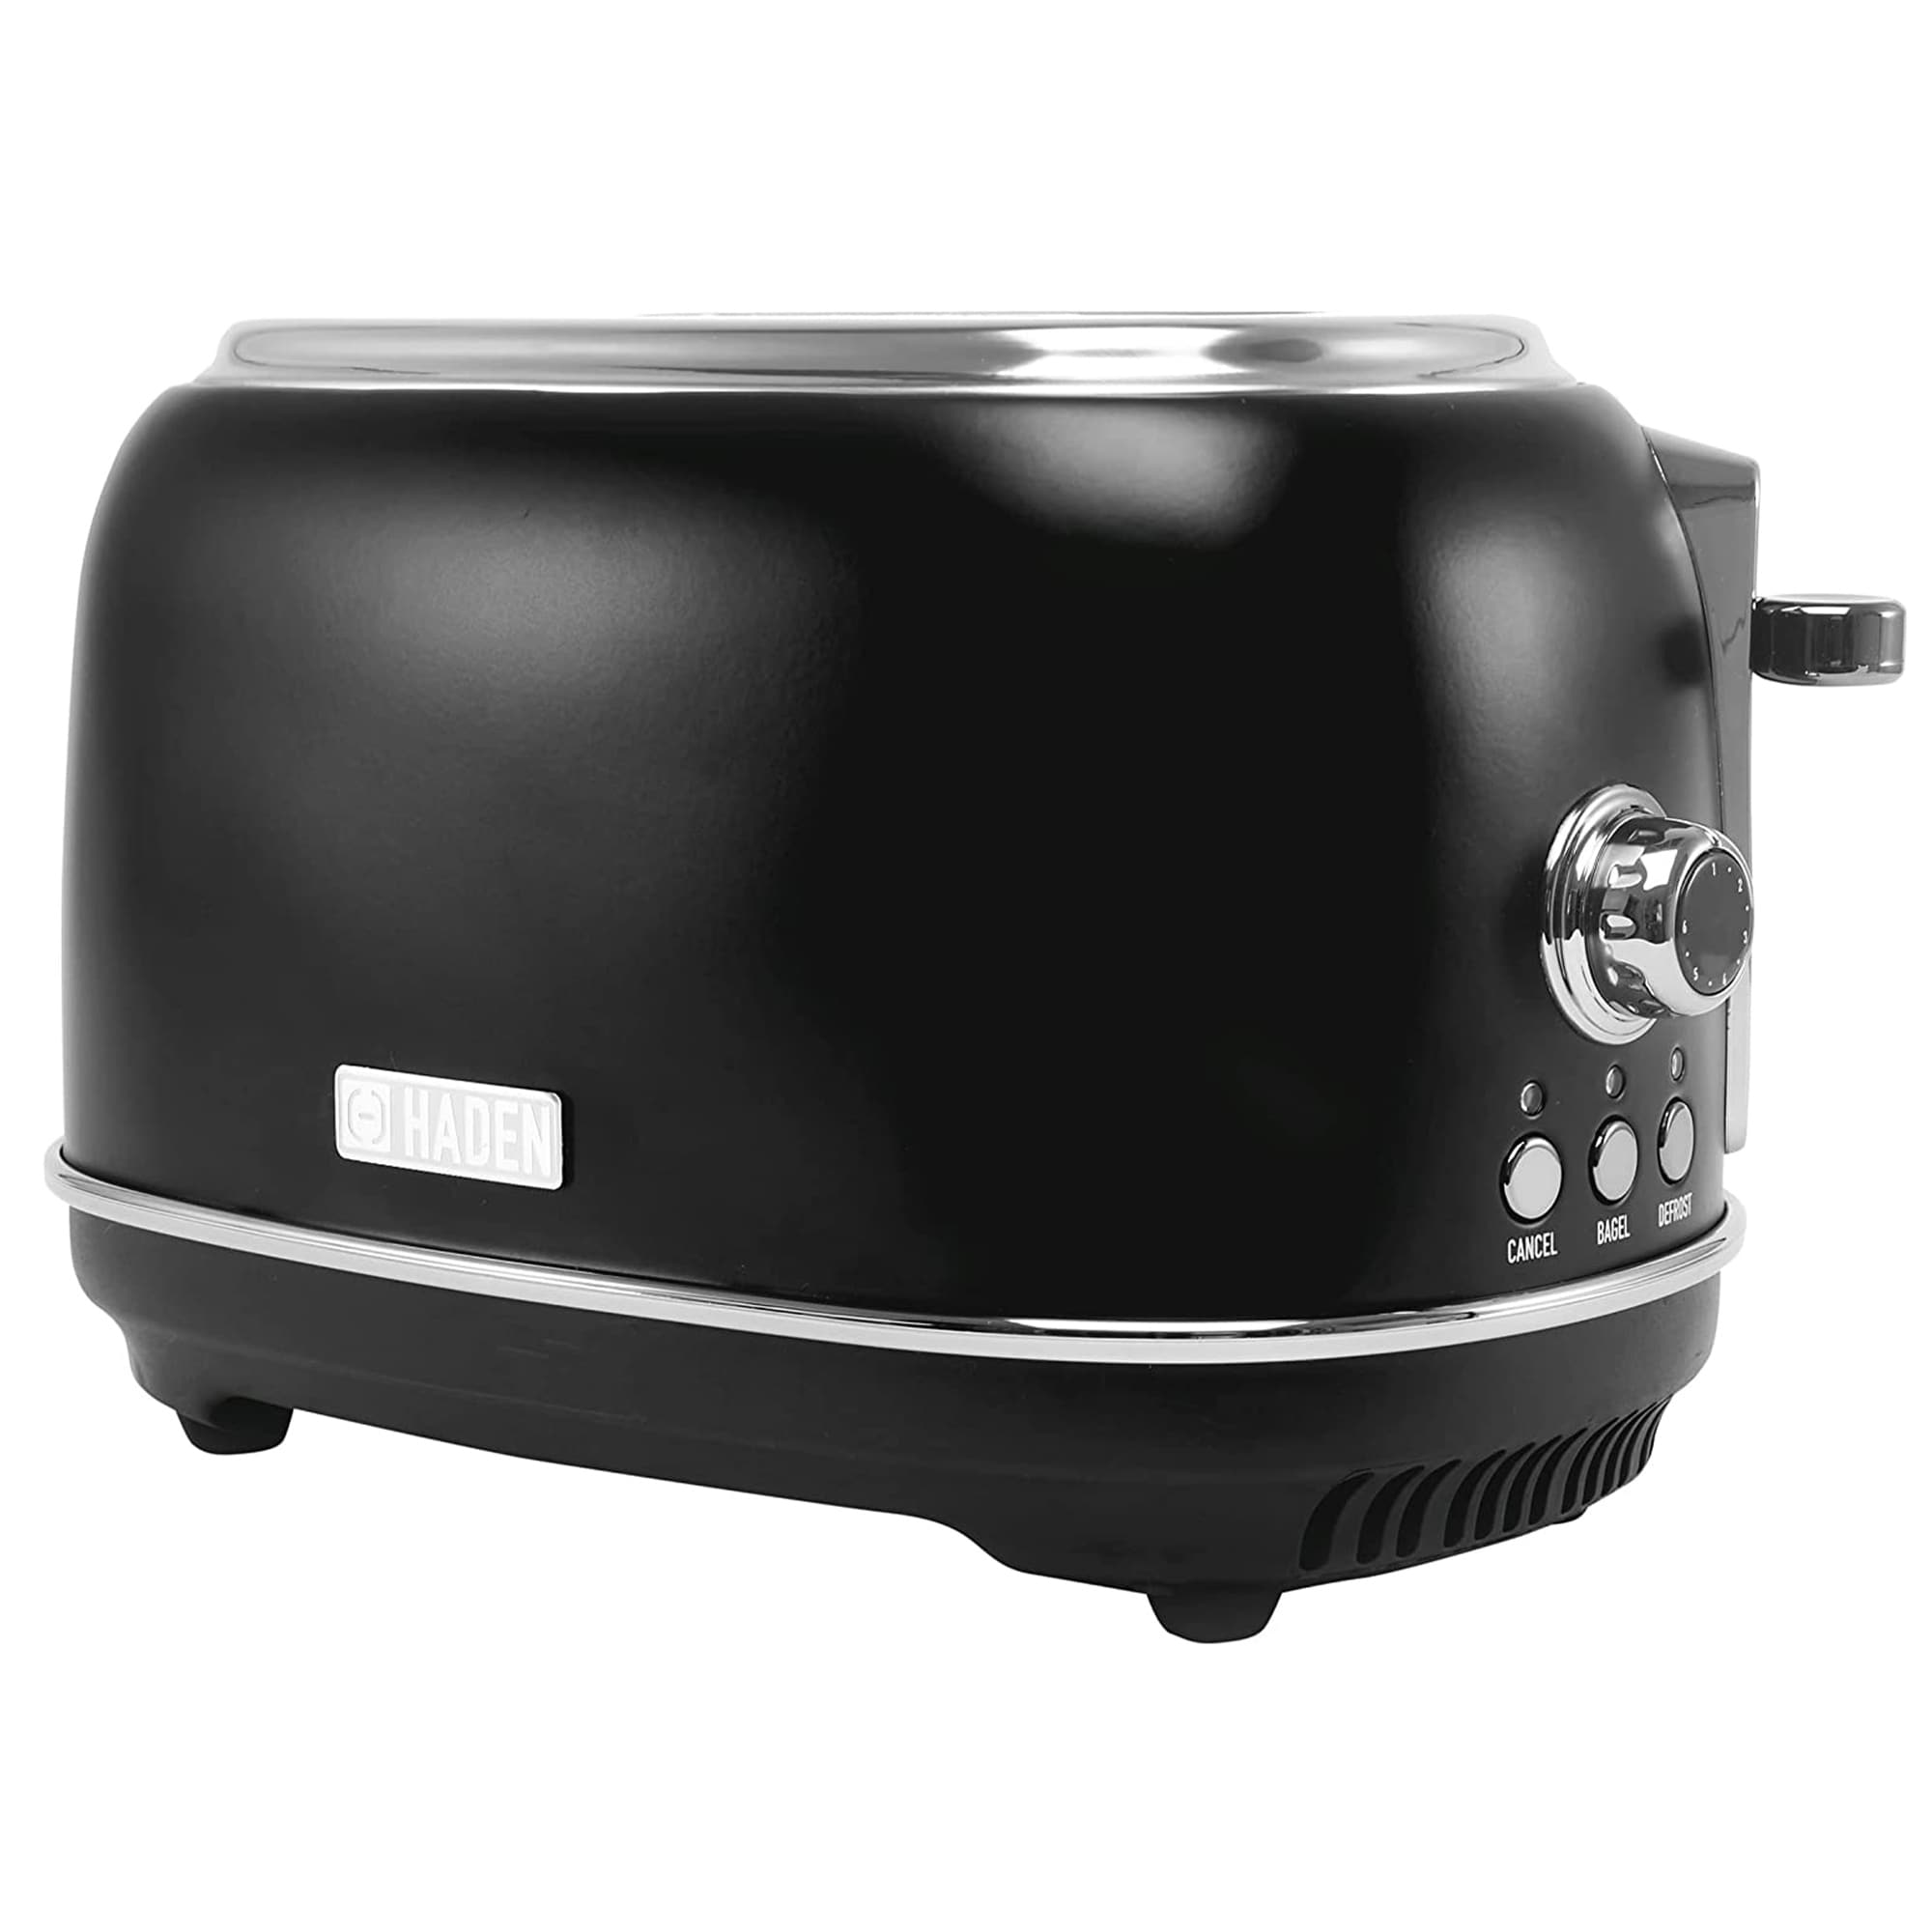 https://ak1.ostkcdn.com/images/products/is/images/direct/9a37bce529dbd55f09415bc568c5193001e8bc24/Haden-Heritage-2-Slice-Wide-Slot-Toaster-with-Removable-Crumb-Tray%2C-Black-Chrome.jpg